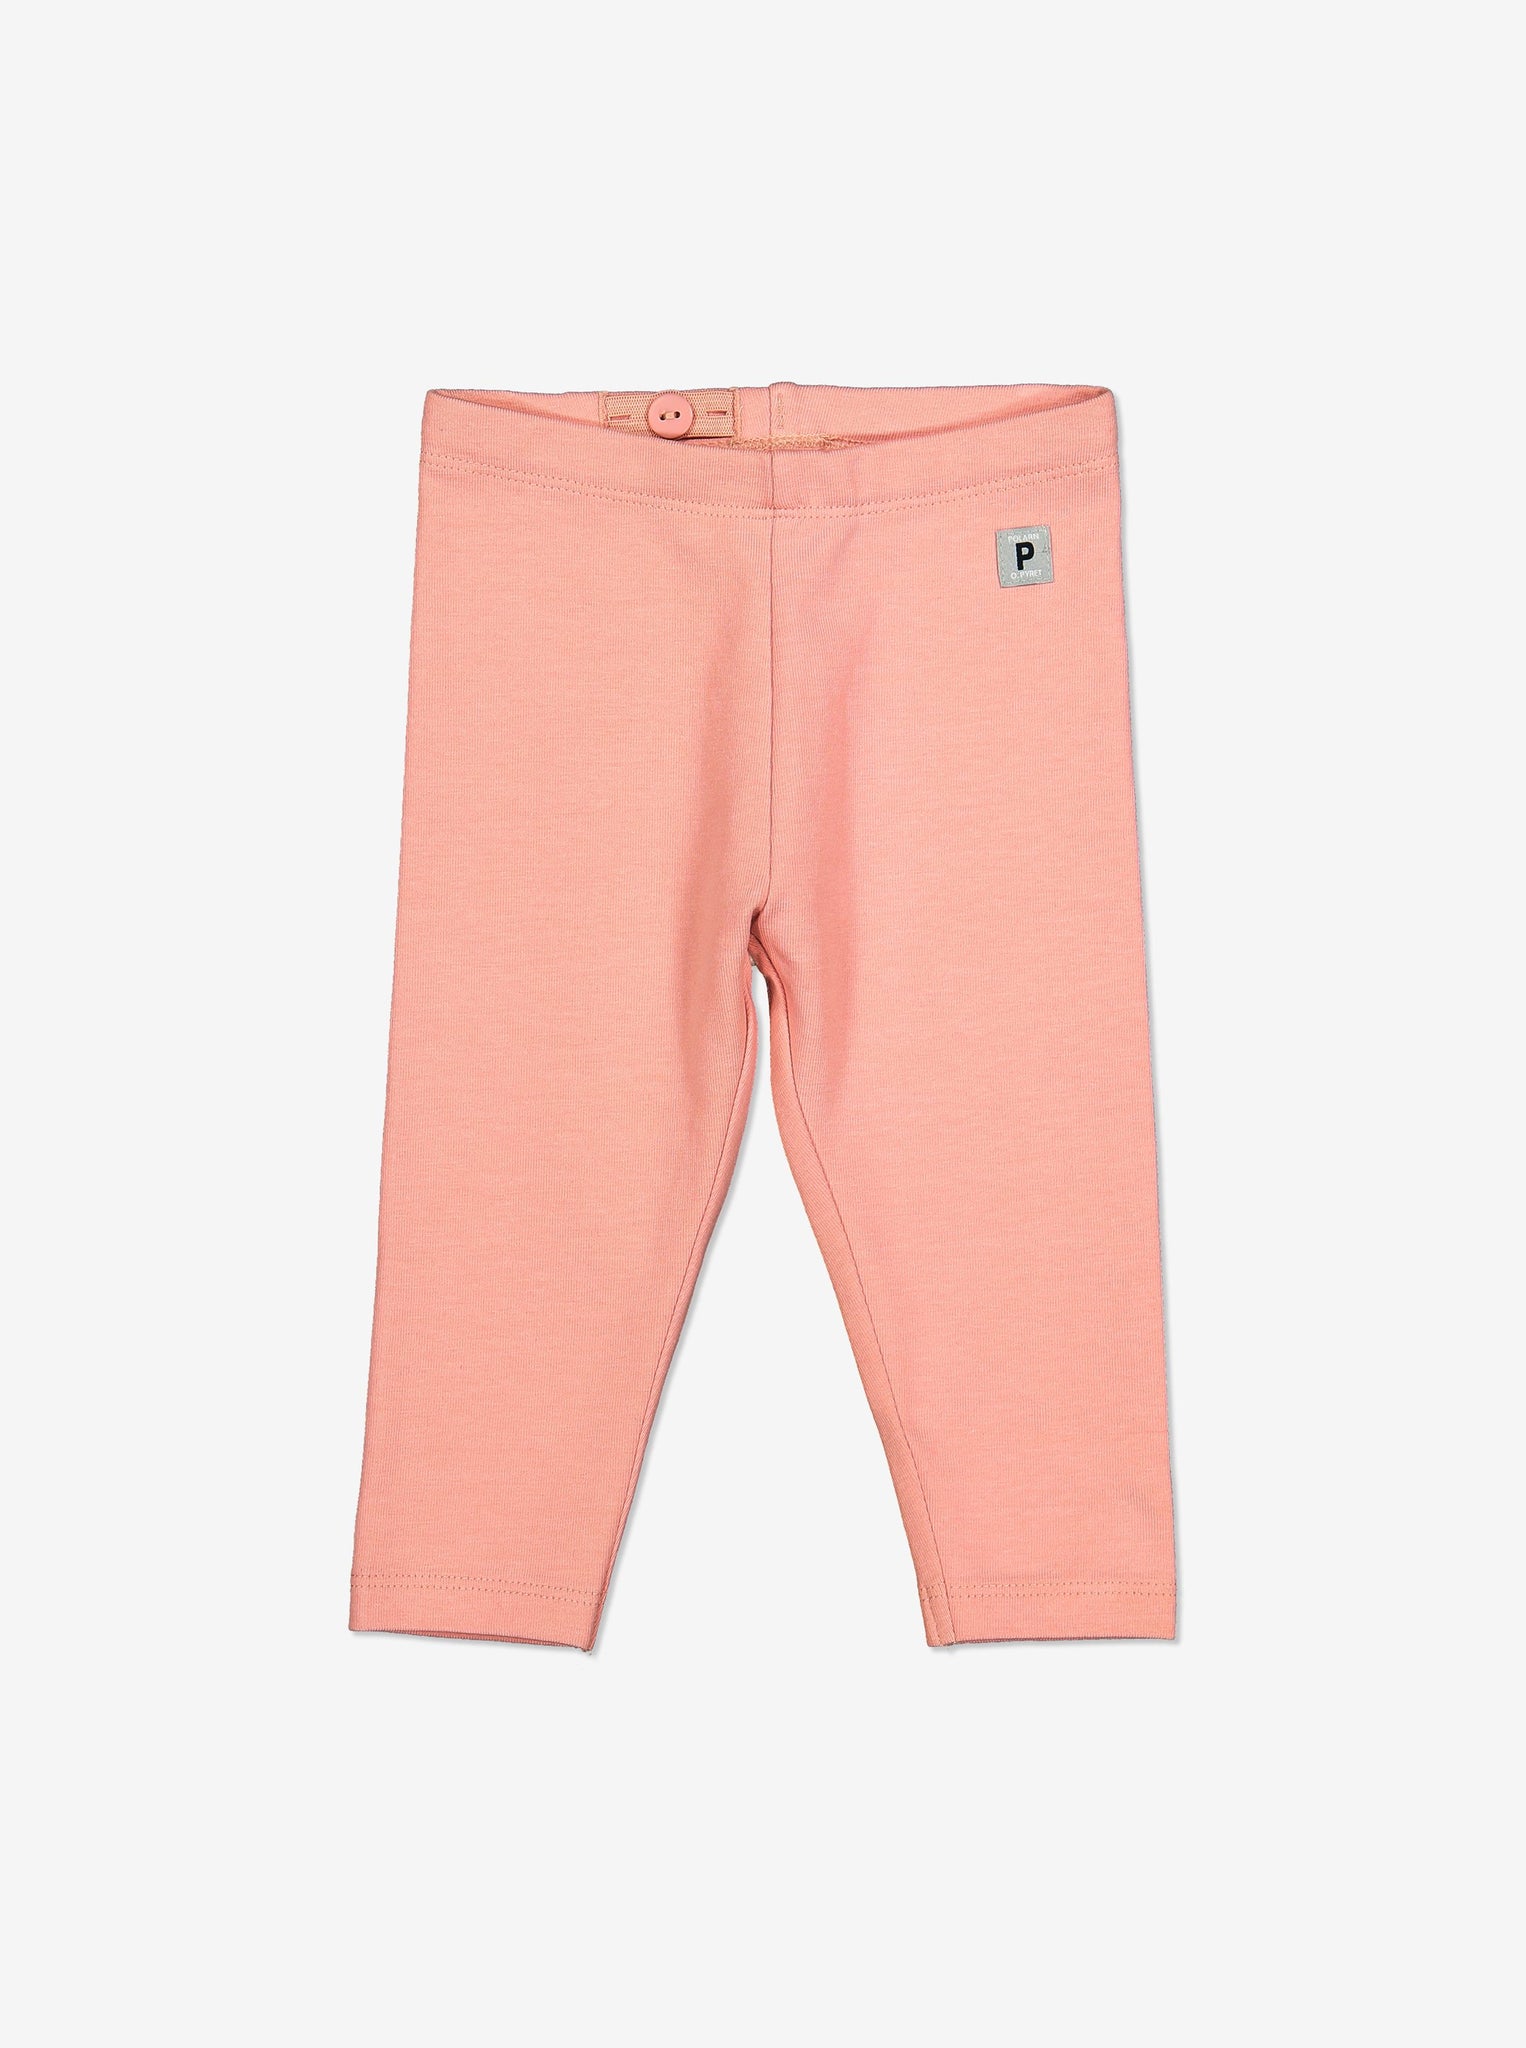 Organic baby pink leggings, durable comfy and warm, Polarn o. pyret